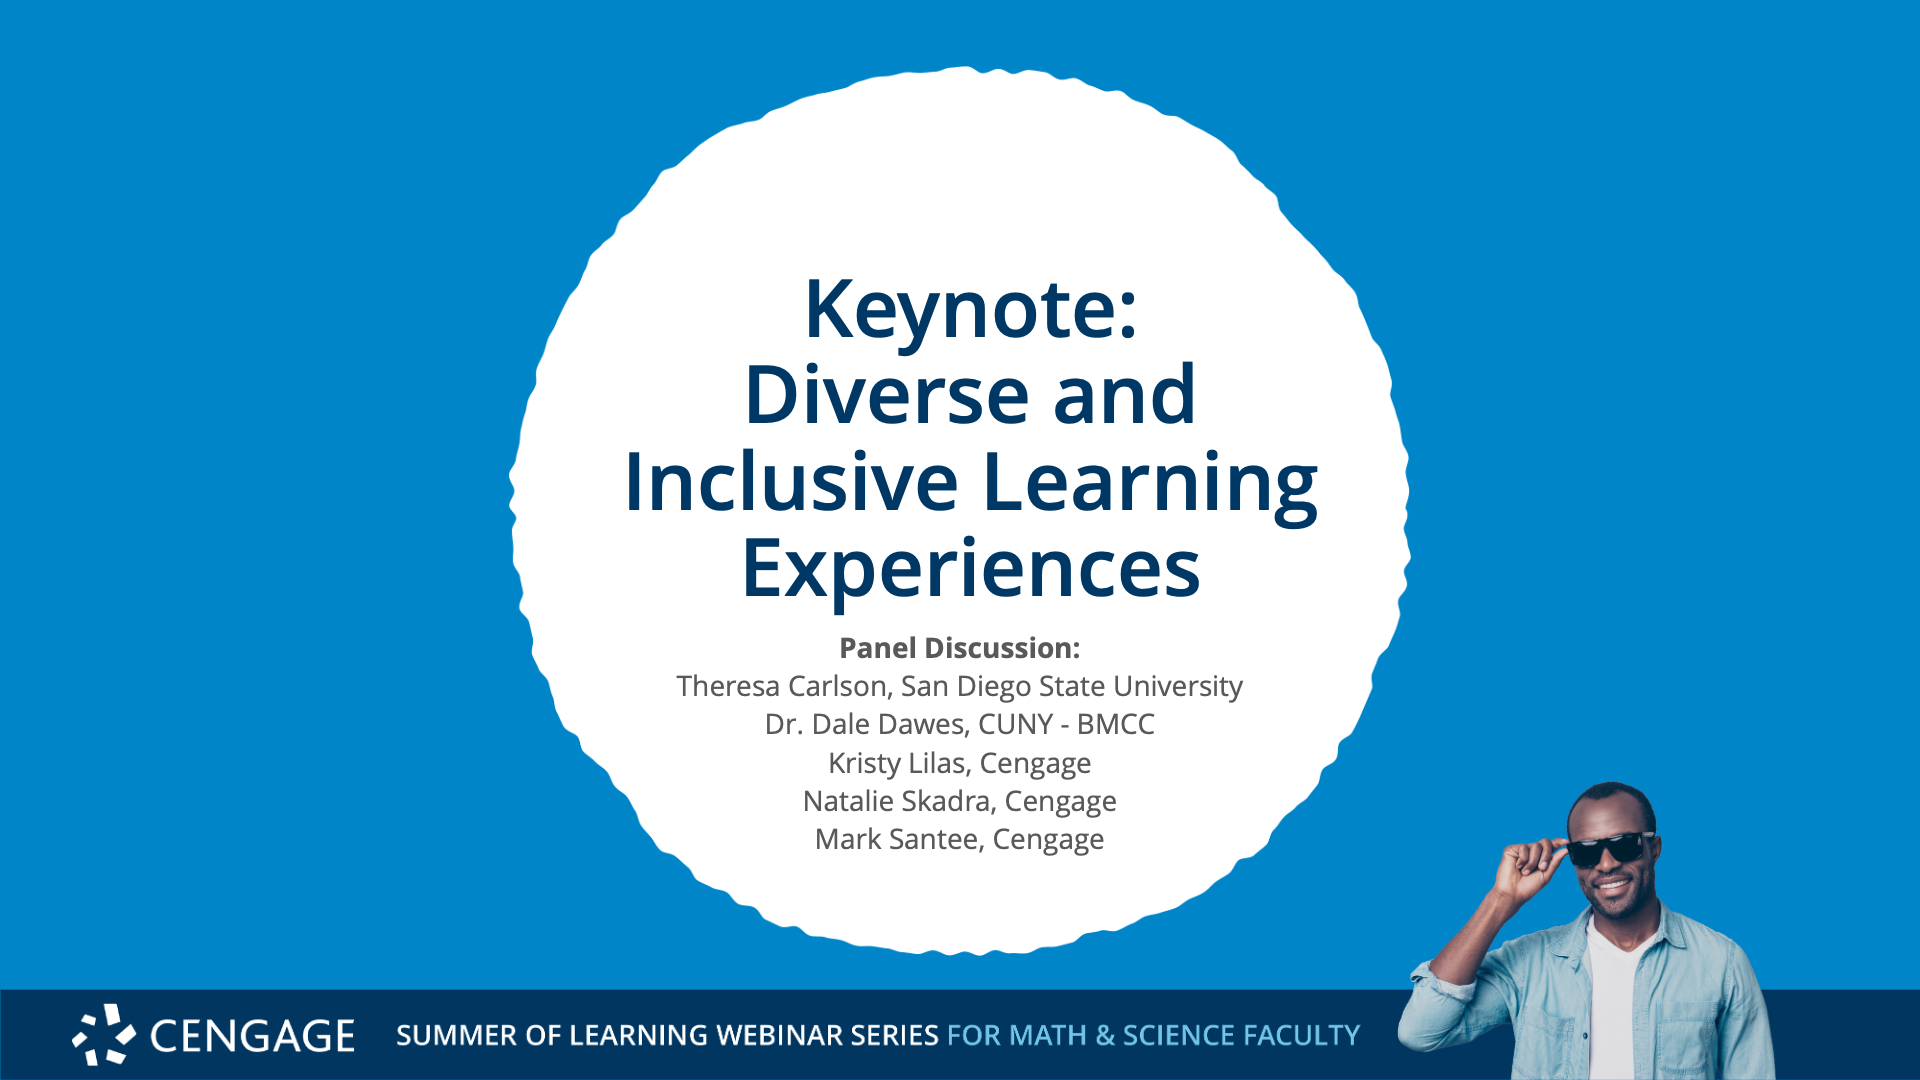 Diverse and Inclusive Learning Experiences